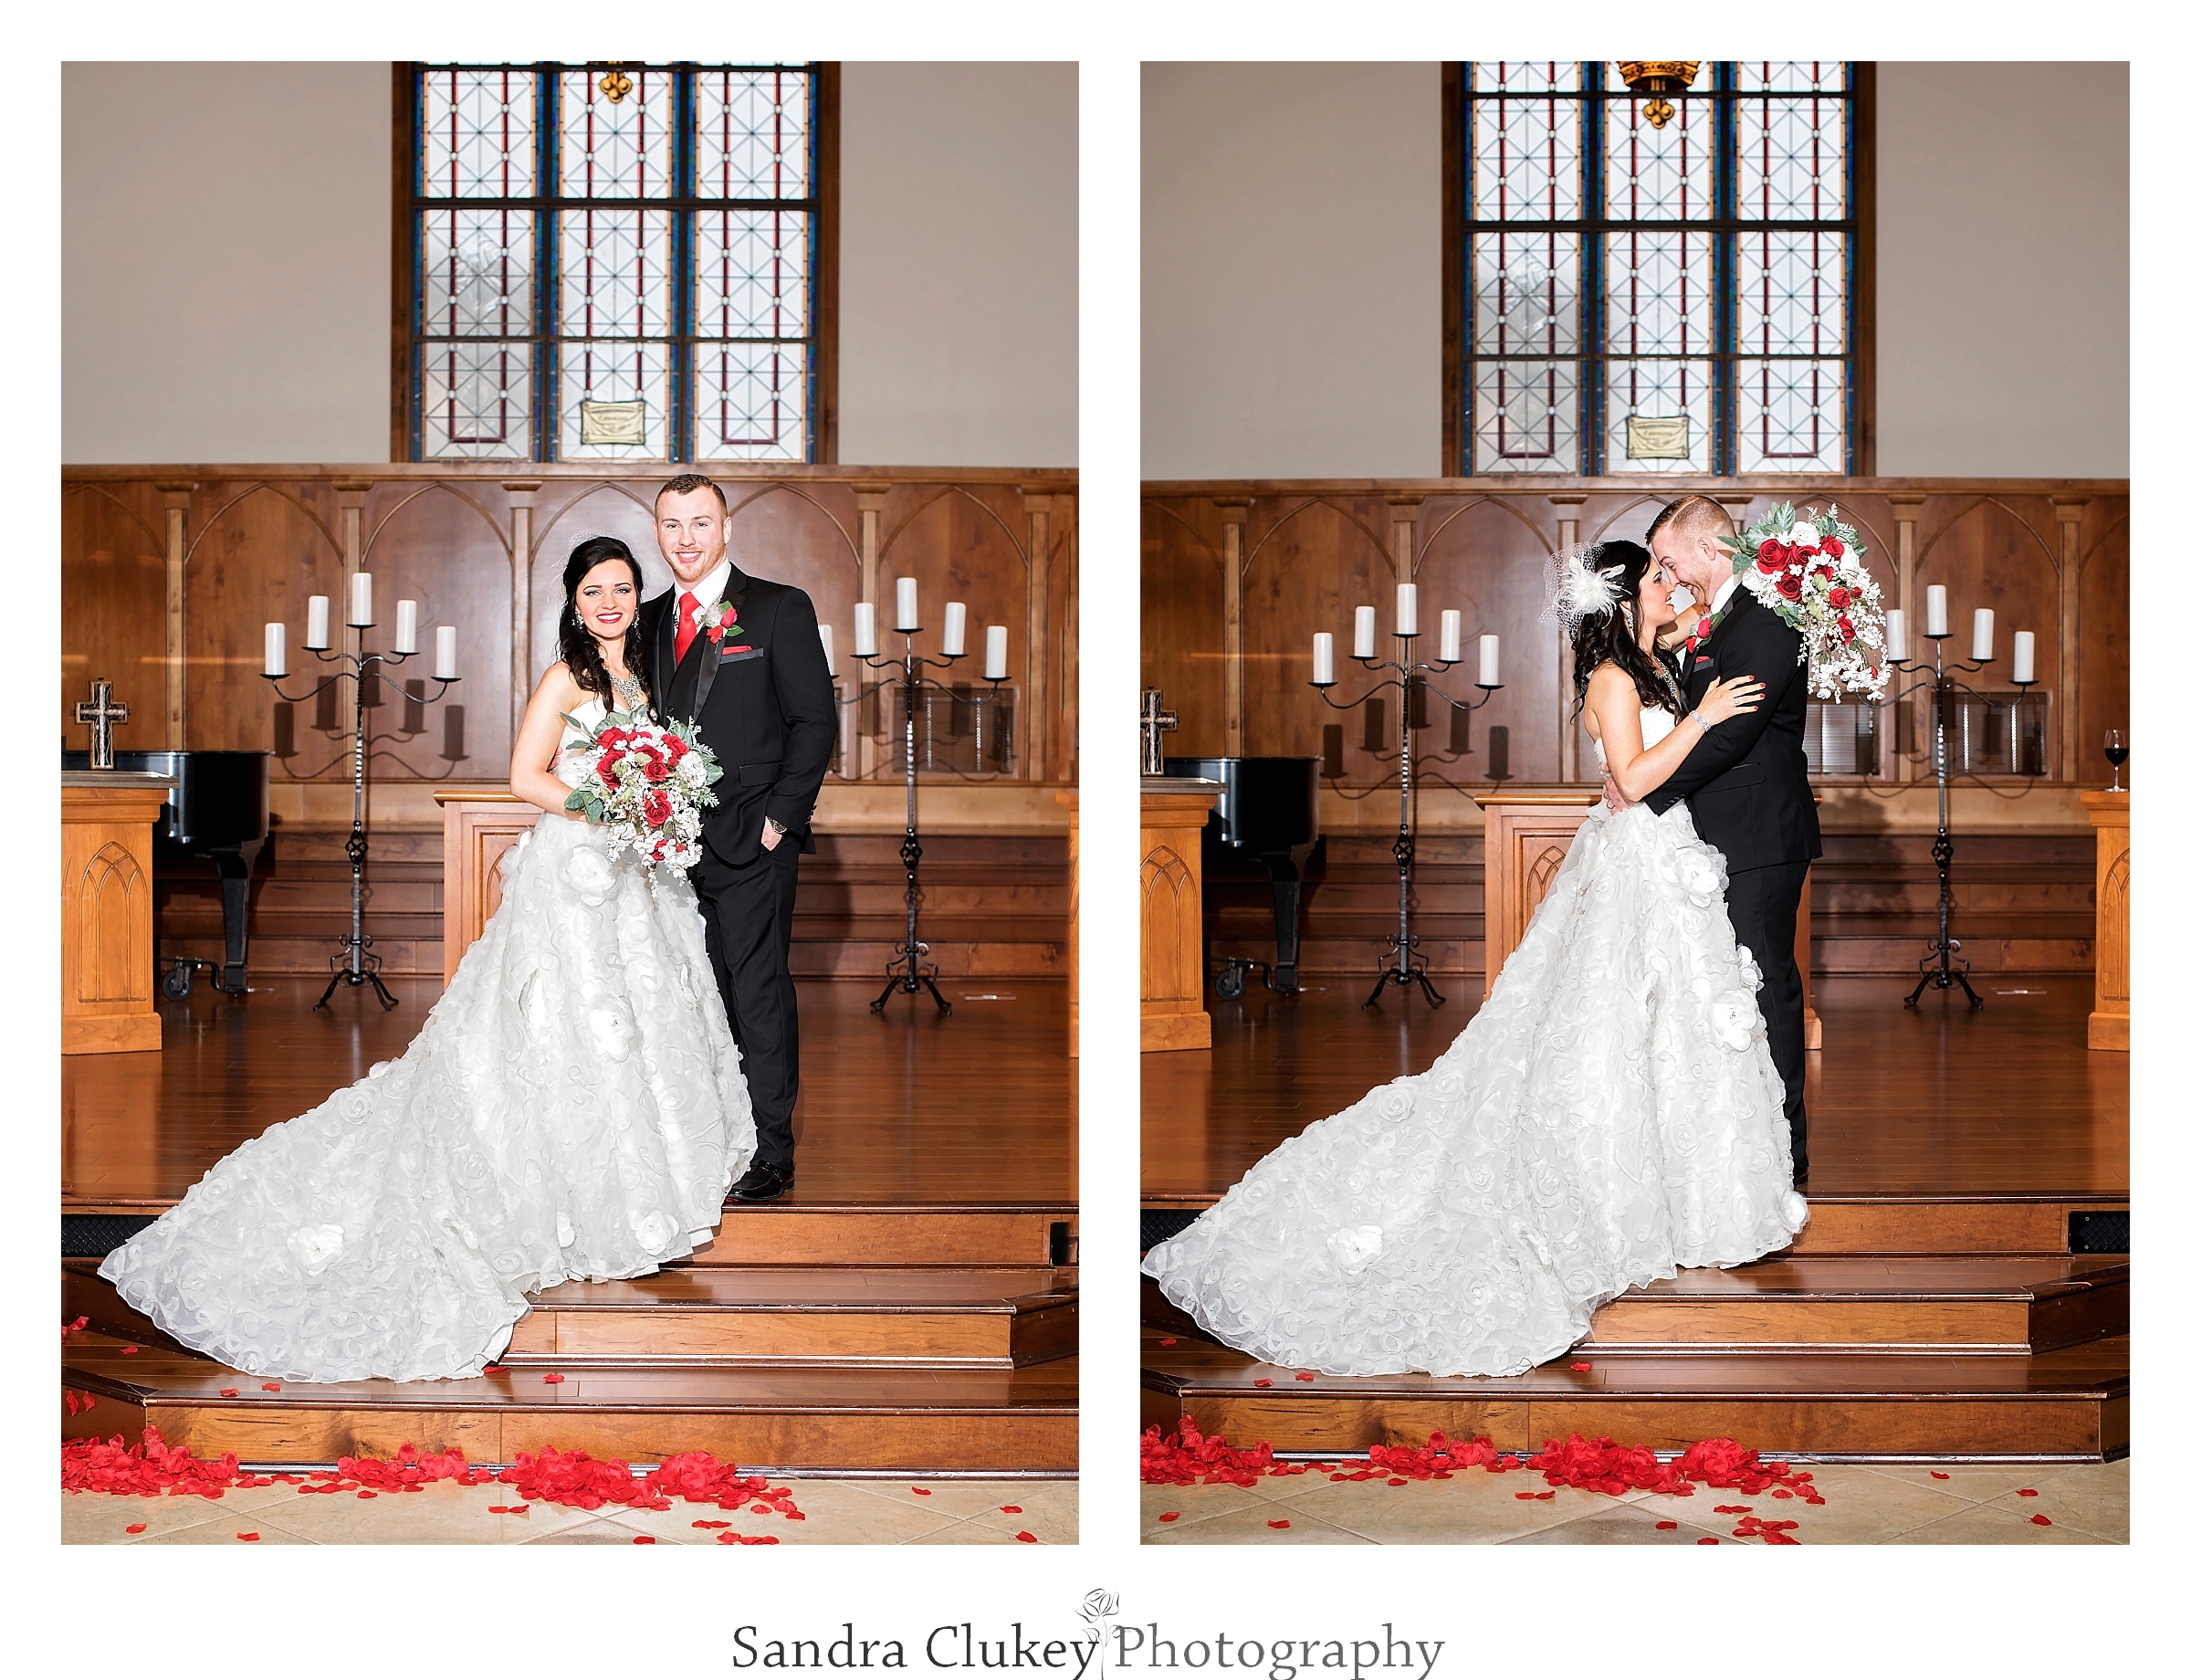 Formal wedding images of Bride and groom at  Lee University chapel, Cleveland TN.